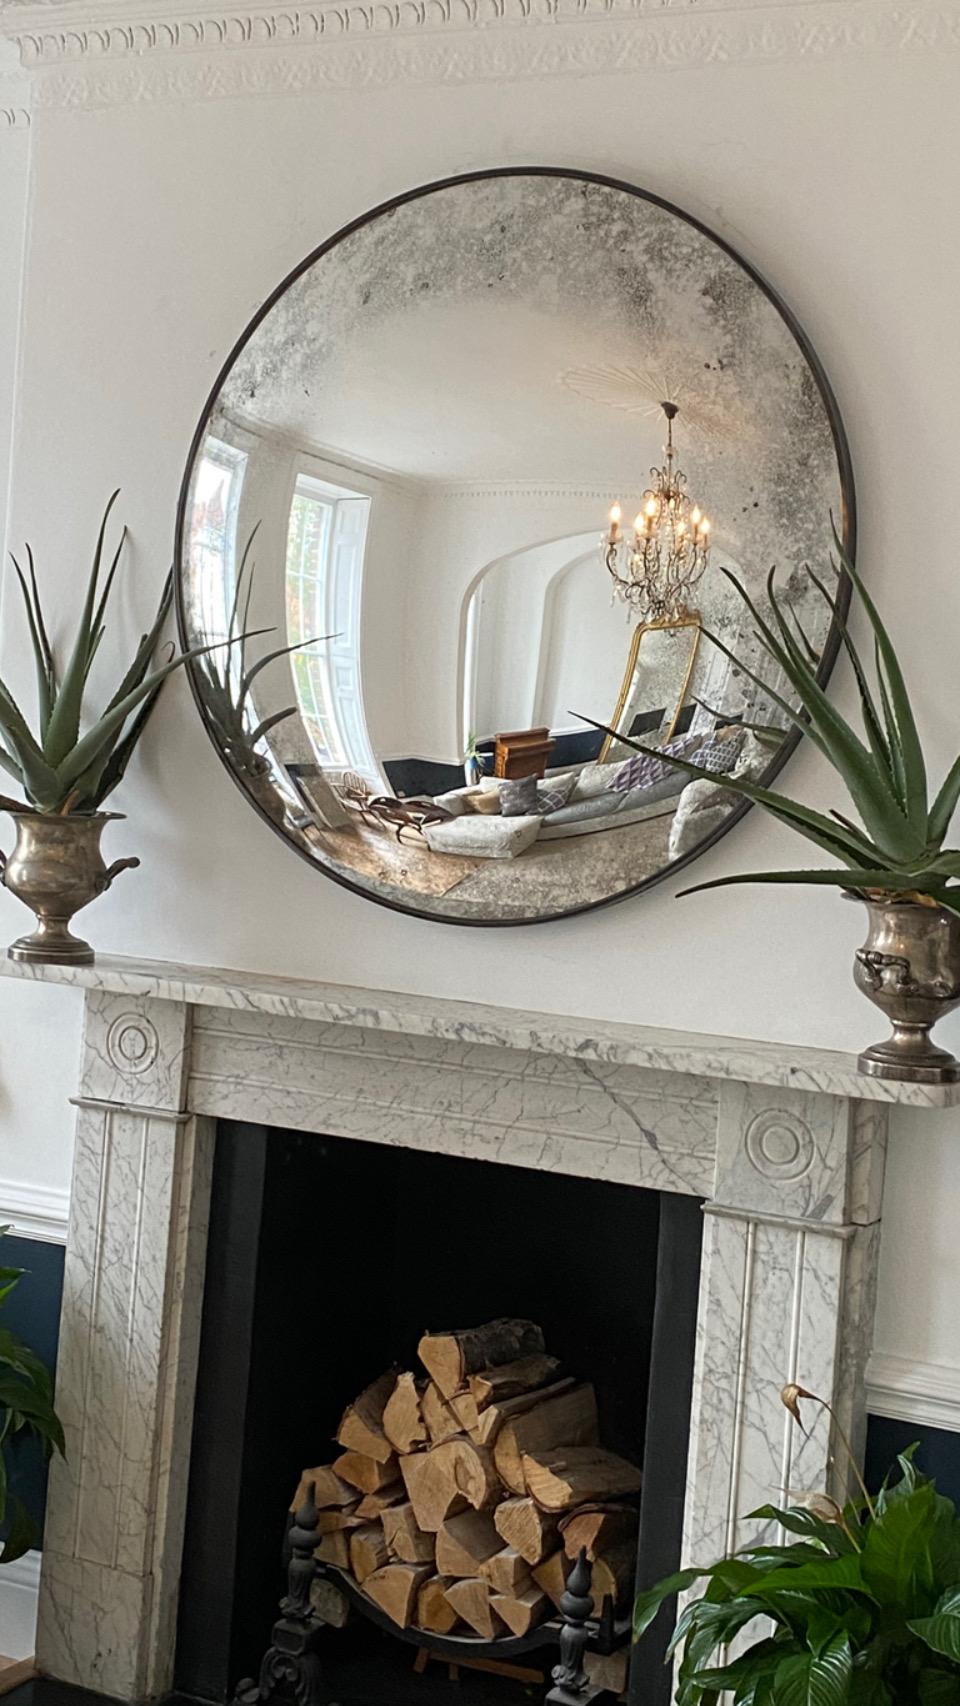 The Ferrara Carbonne is a highly decorative convex wall mirror that creates a focal point and adds elegance to any room. The mirror itself is silvered using traditional methods and fabricated from 6mm low iron glass with a curvature of 8 cms. The